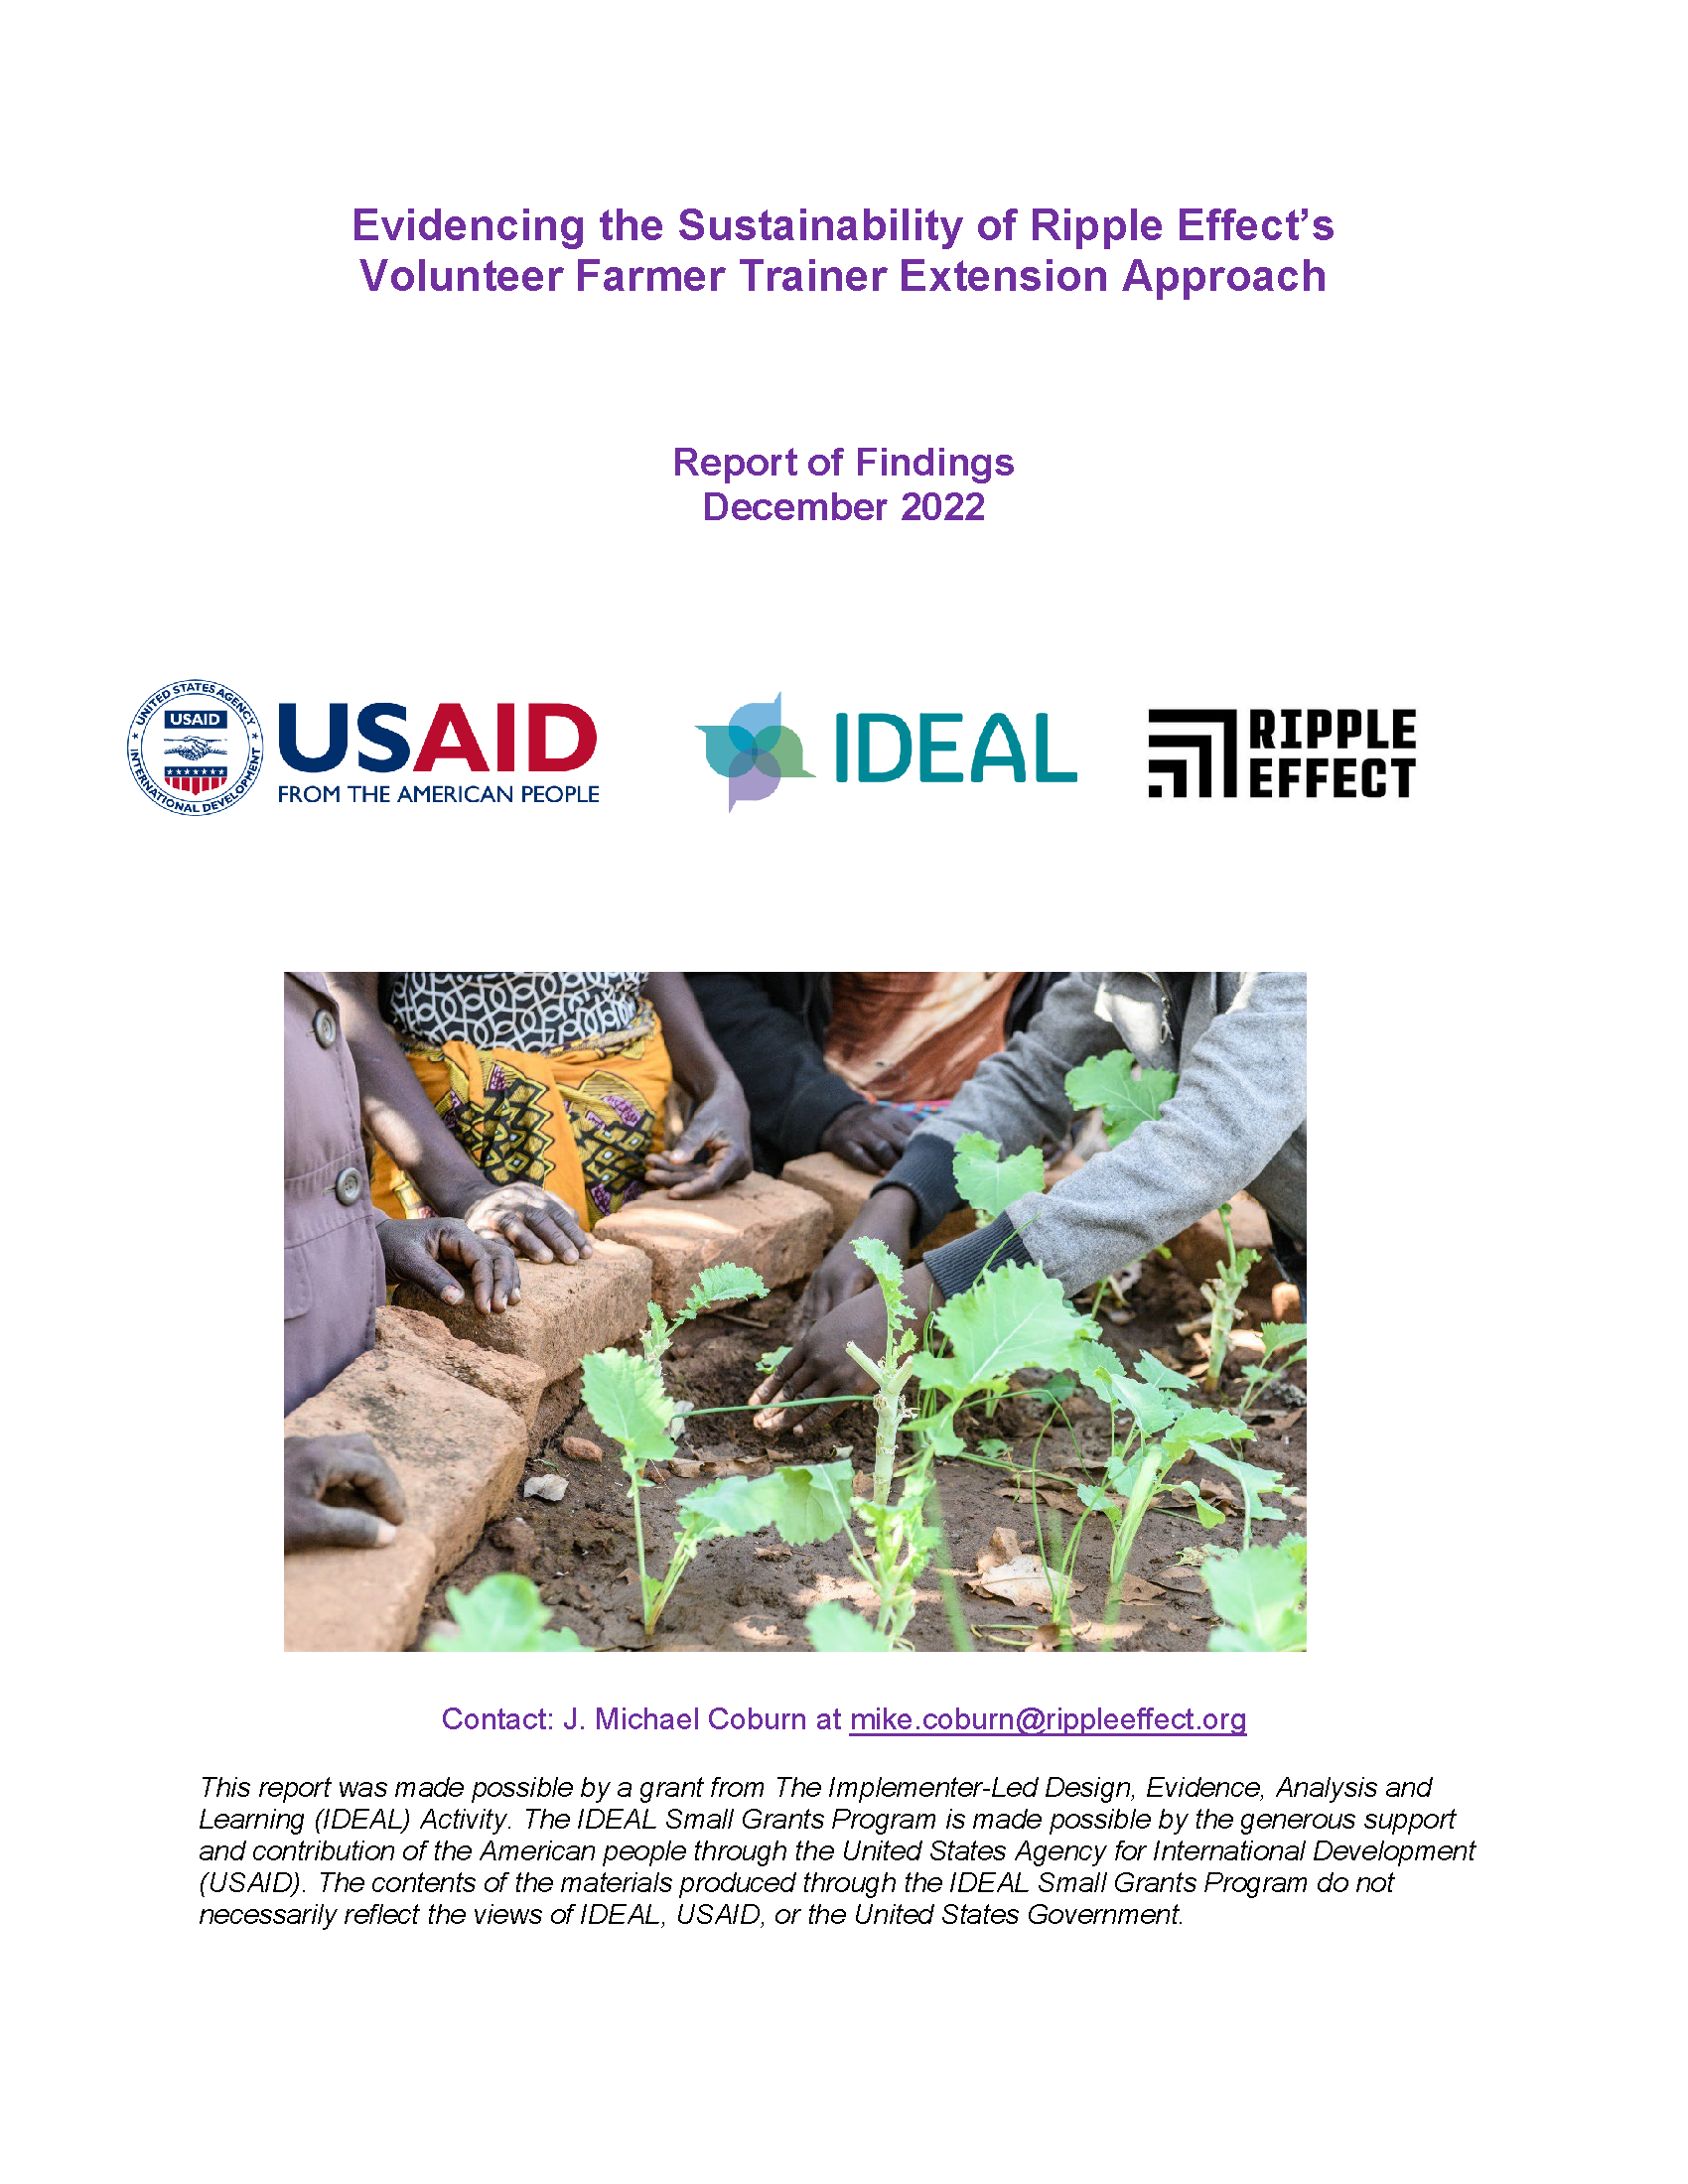 Cover page for Evidencing the Sustainability of Ripple Effect’s Volunteer Farmer Trainer Extension Approach